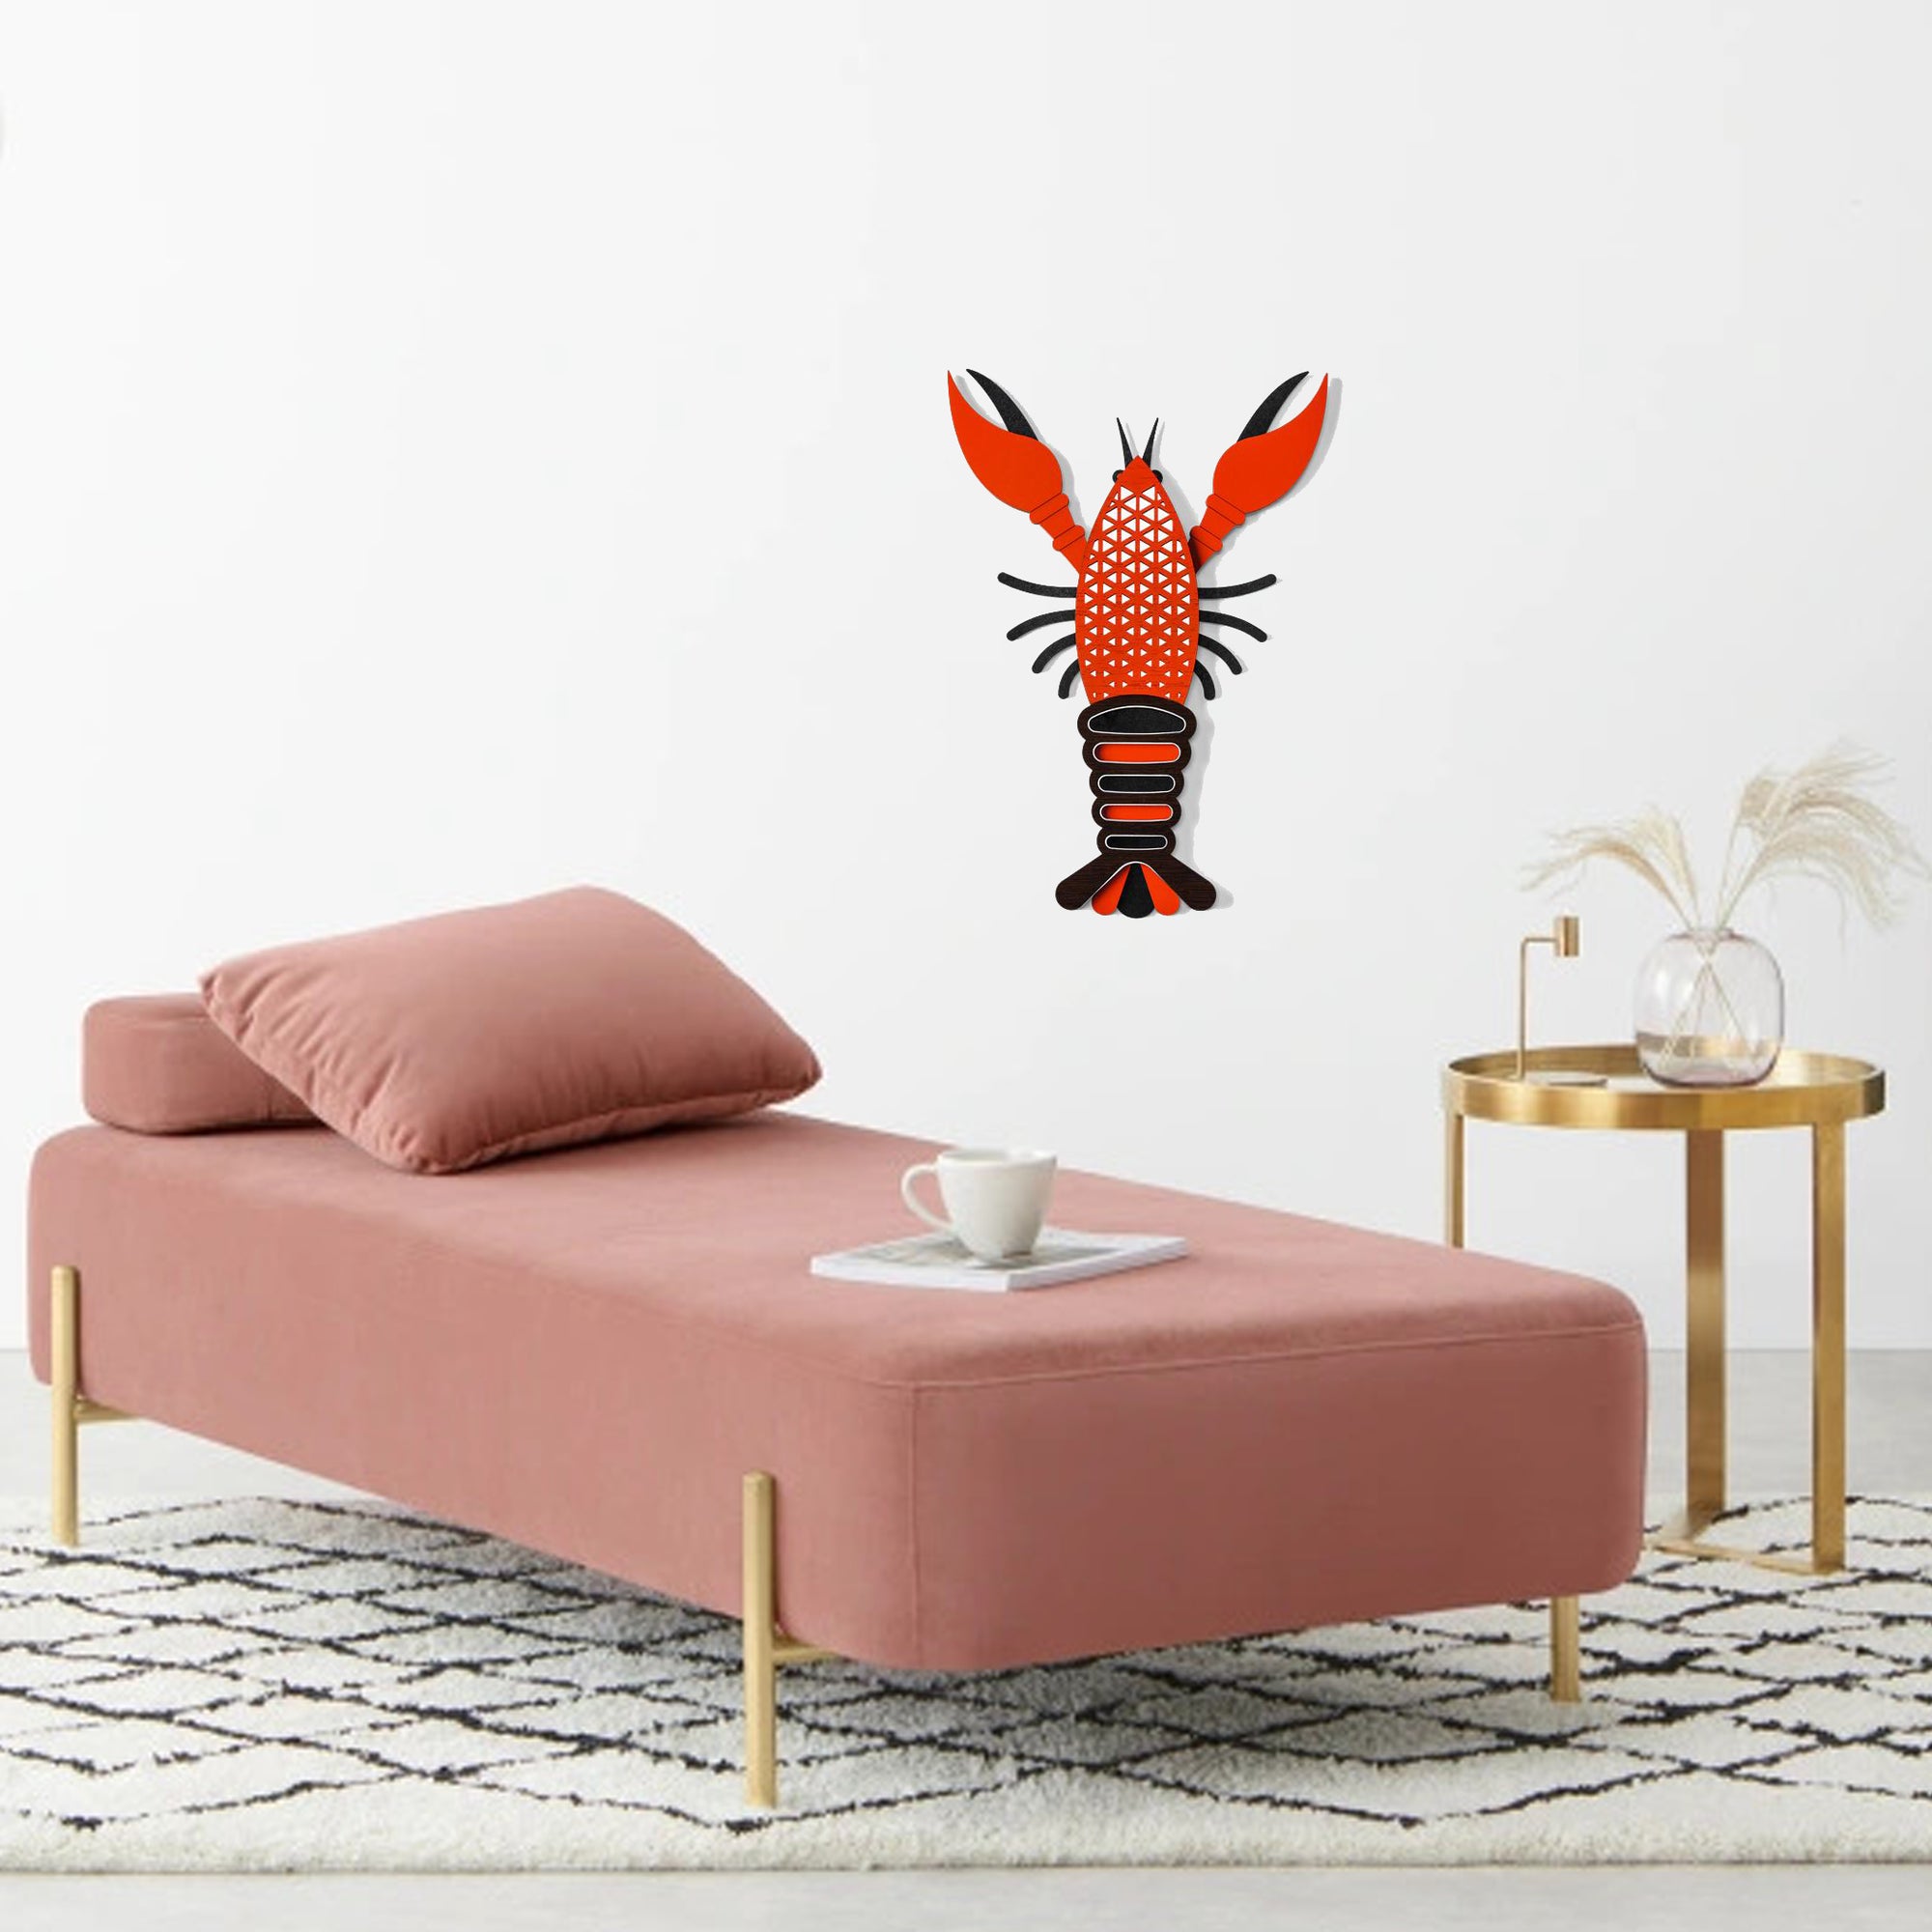 Lobster Ornaments For Wall Decor